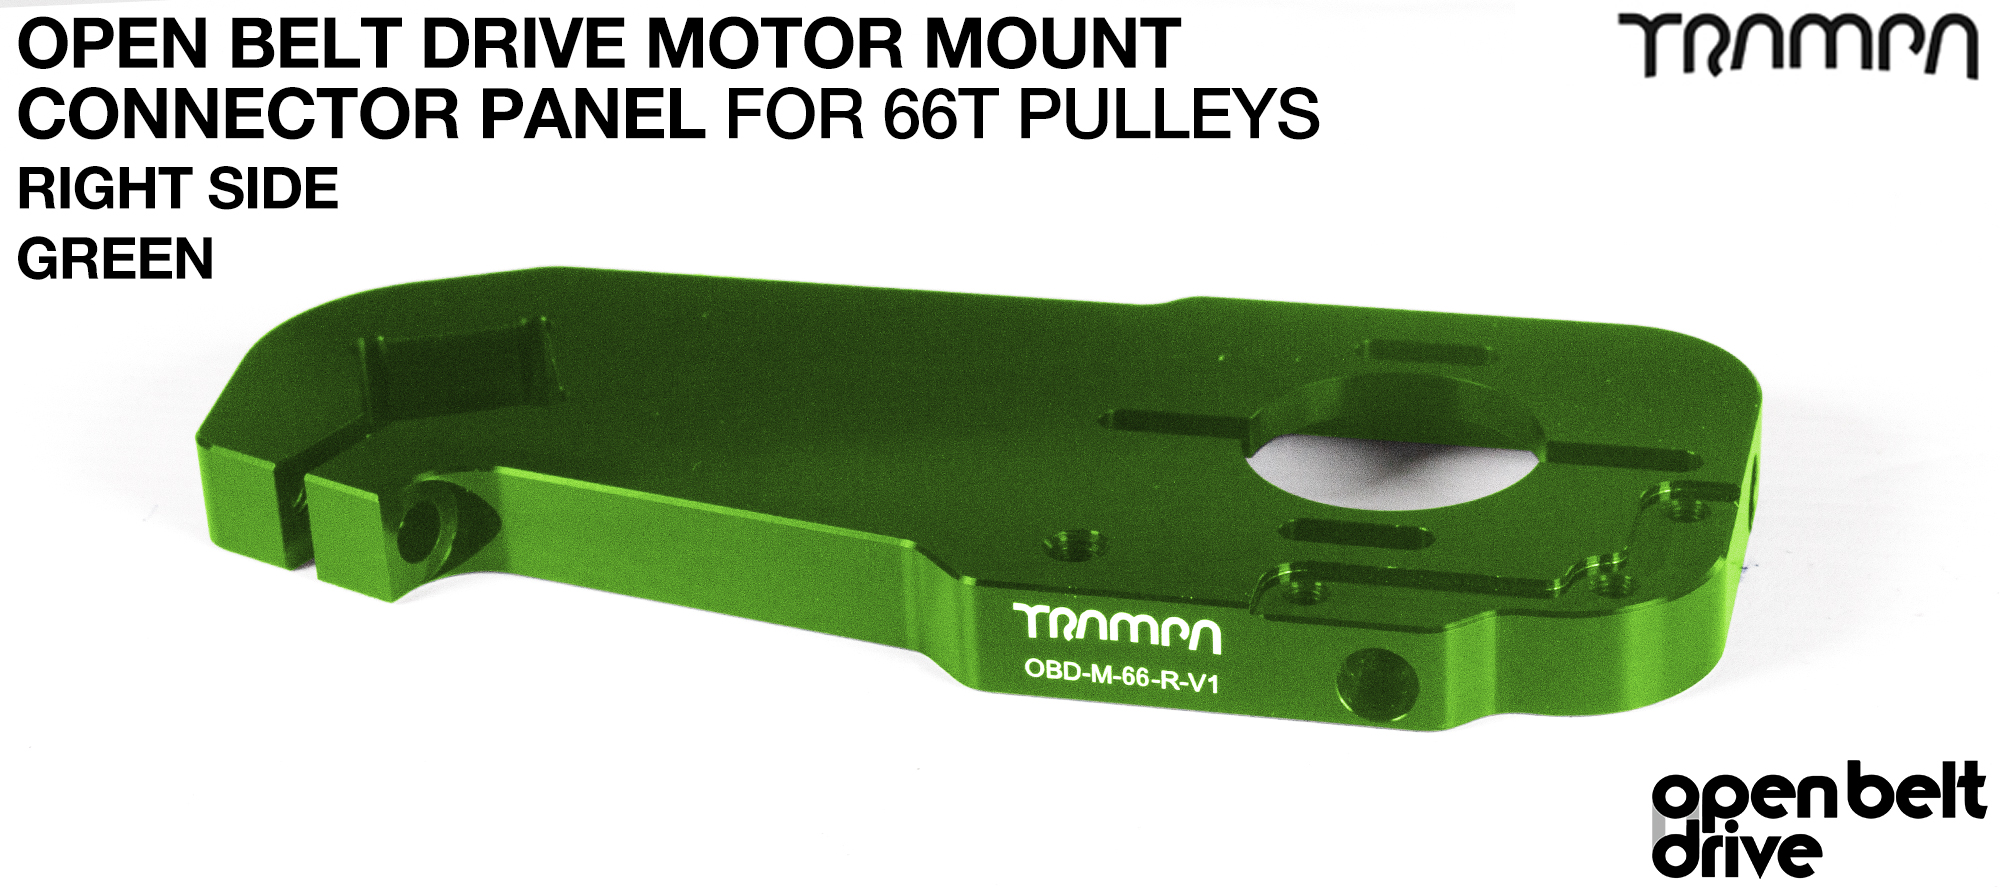 OBD Open Belt Drive Motor Mount Connector Panel for 66 tooth Pulleys - GOOFY - GREEN